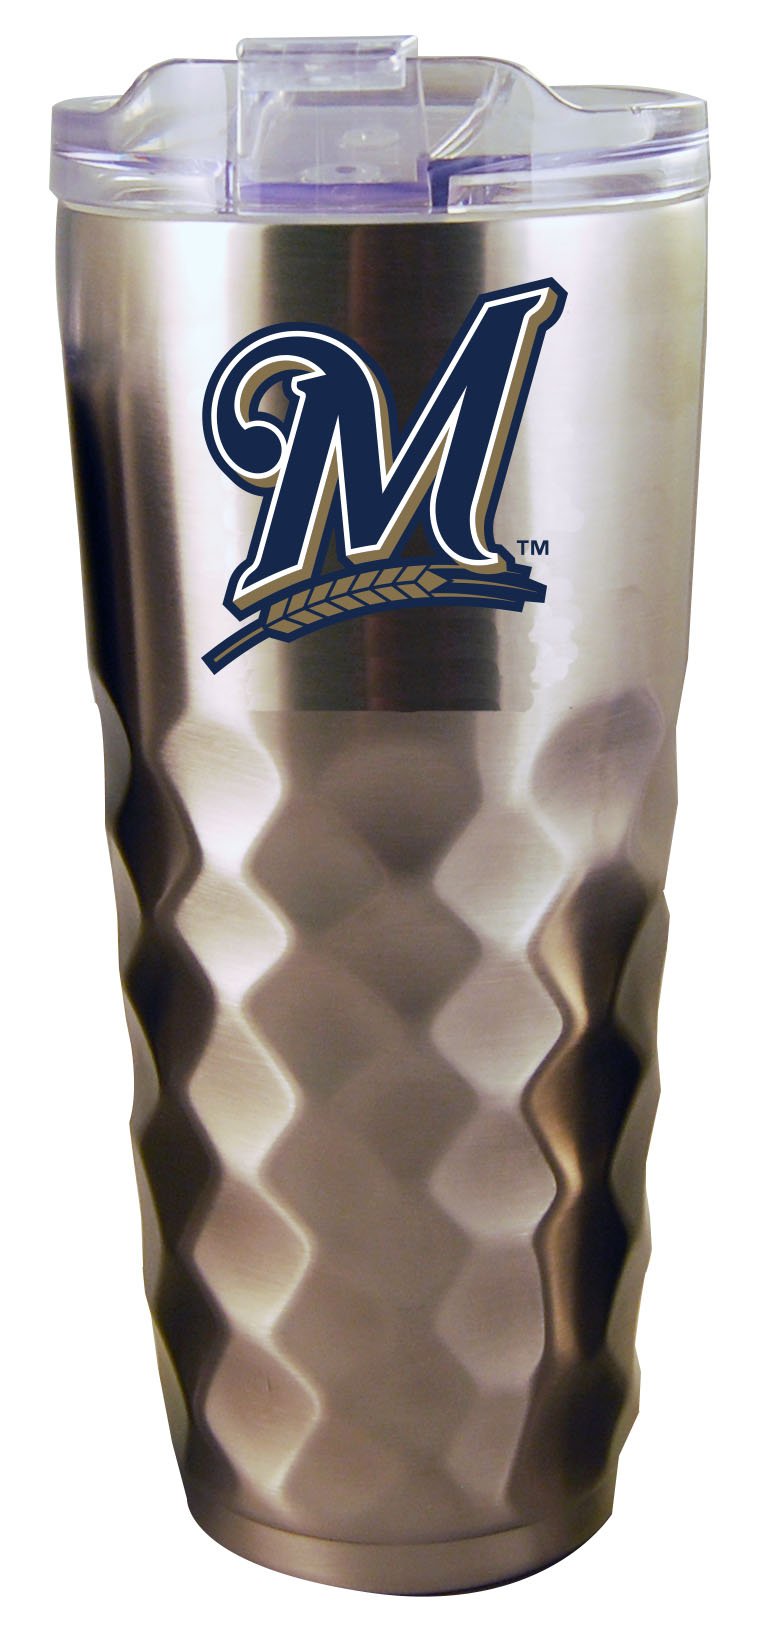 32OZ SS DIAMD TMBLR BREWERS
CurrentProduct, Drinkware_category_All, MBR, Milwaukee Brewers, MLB
The Memory Company